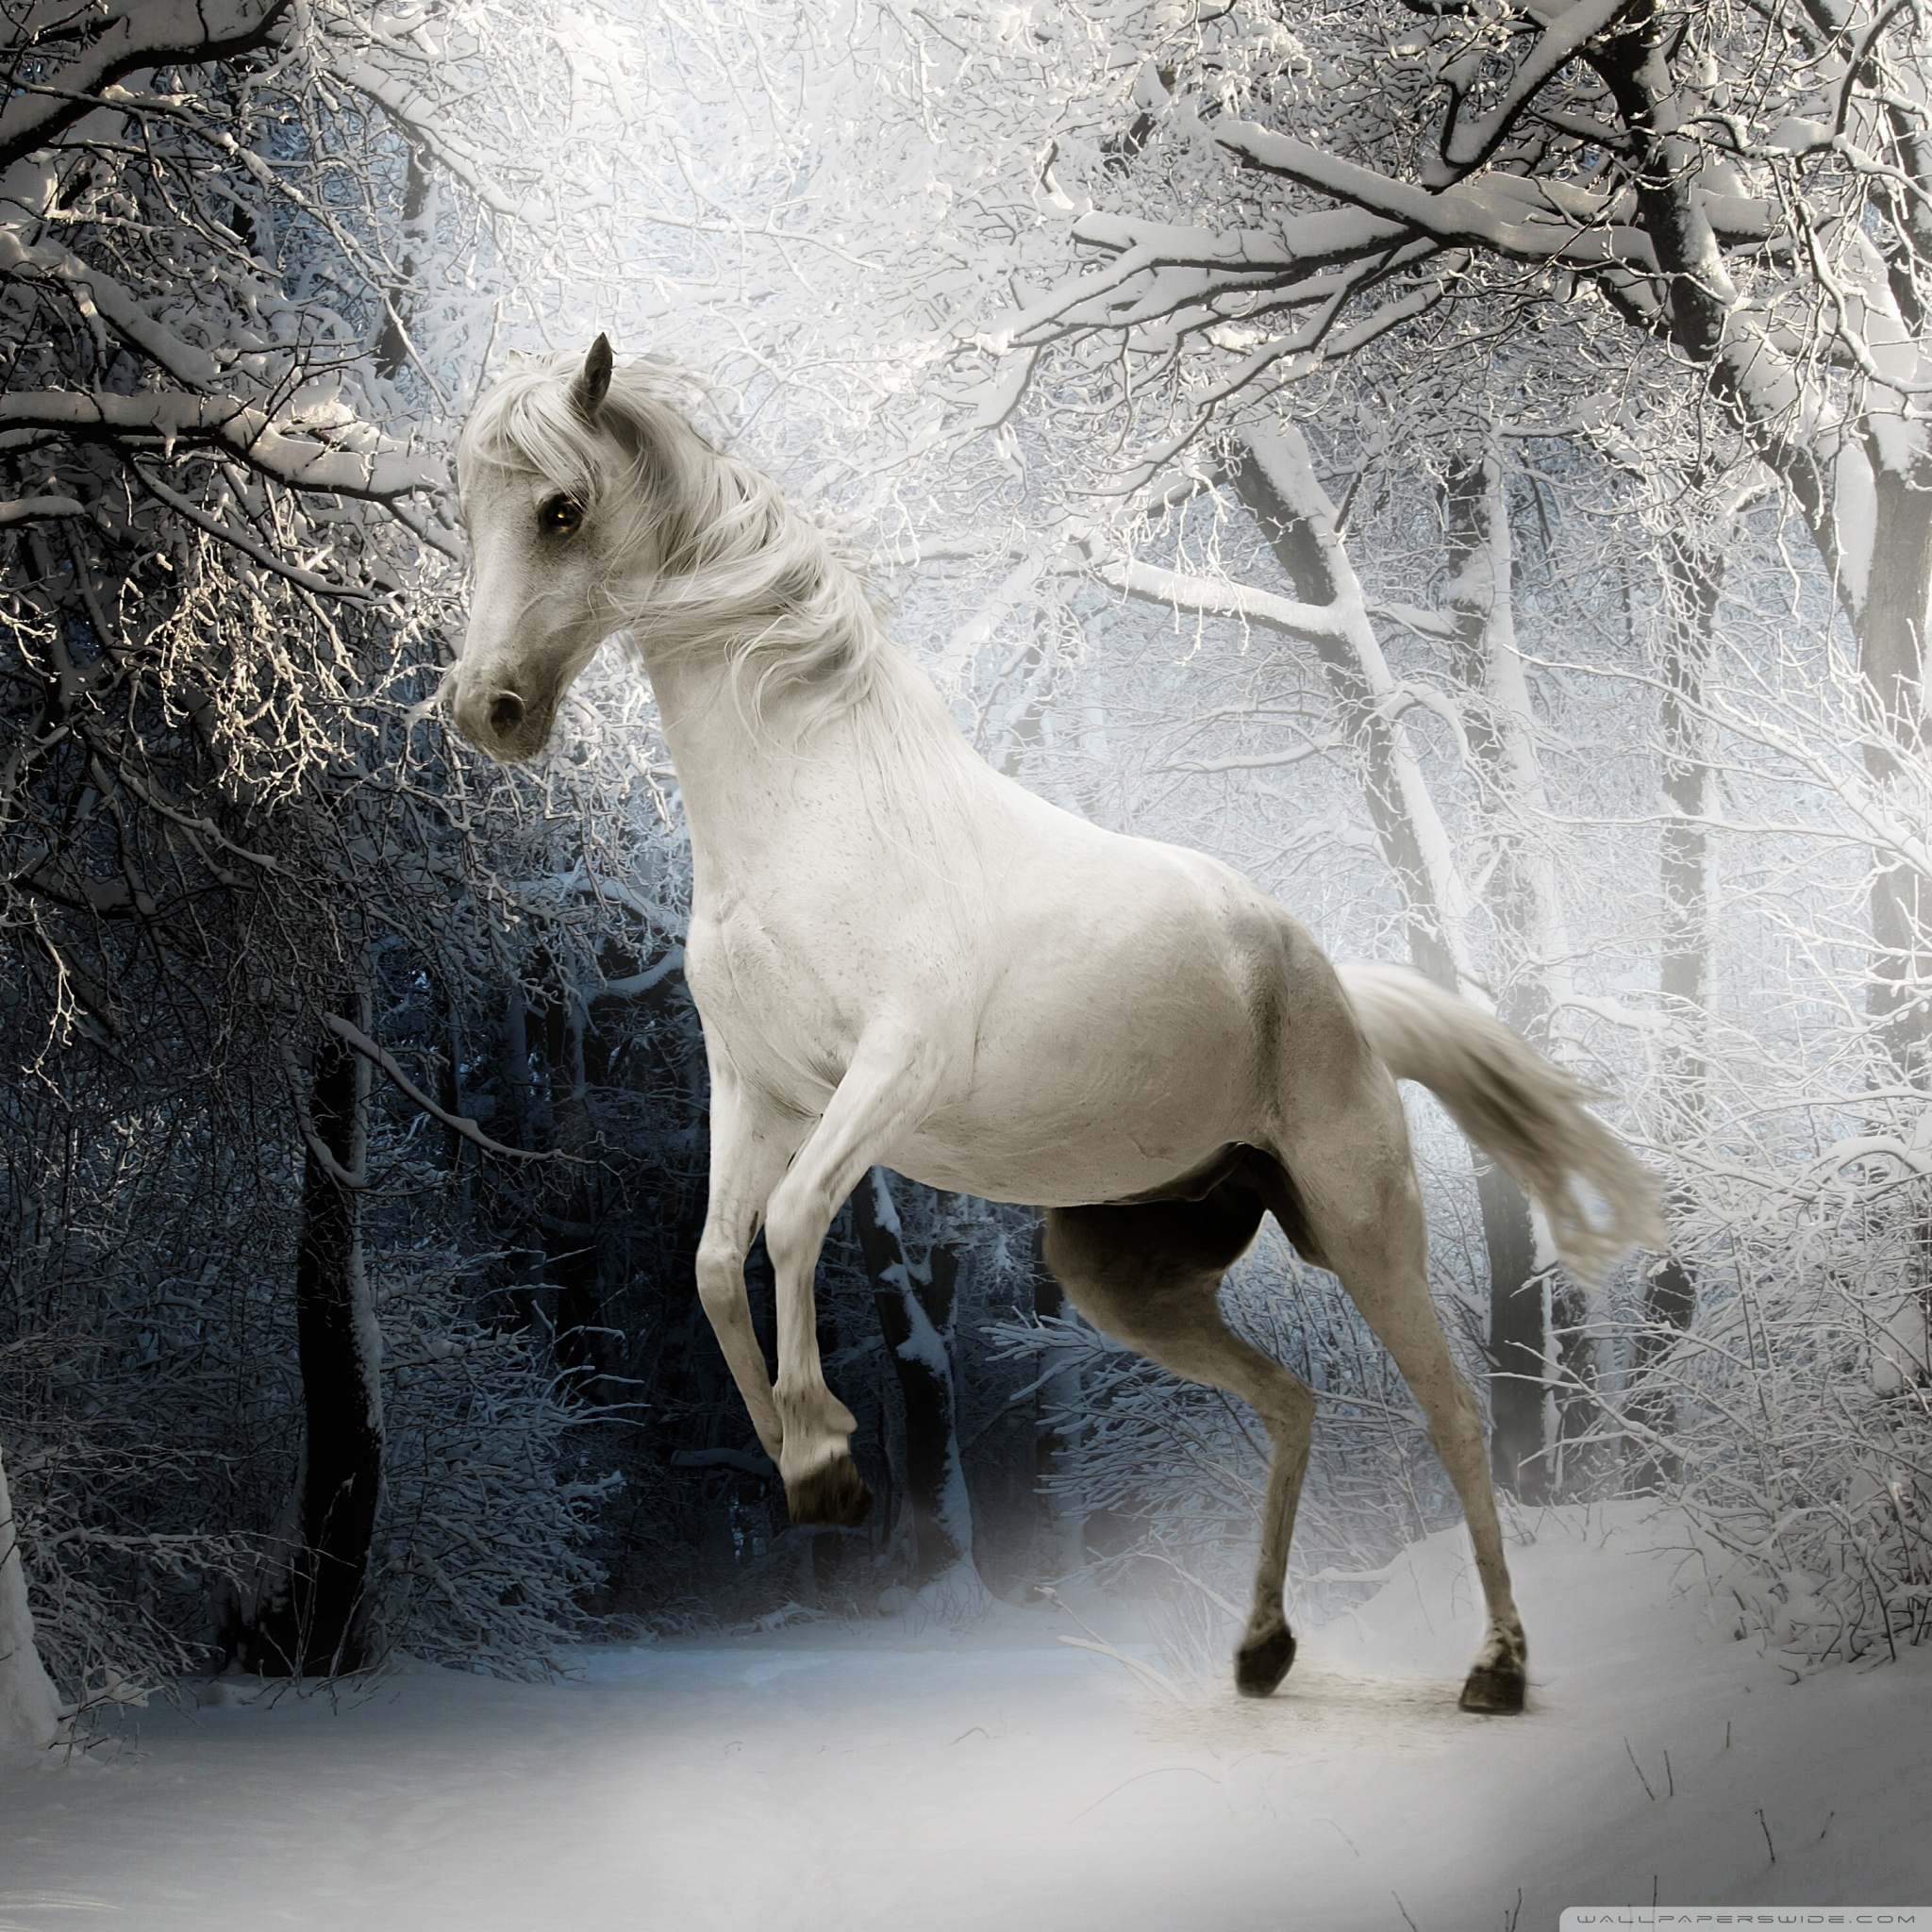 Ipad - Horse Cover Photo Facebook , HD Wallpaper & Backgrounds